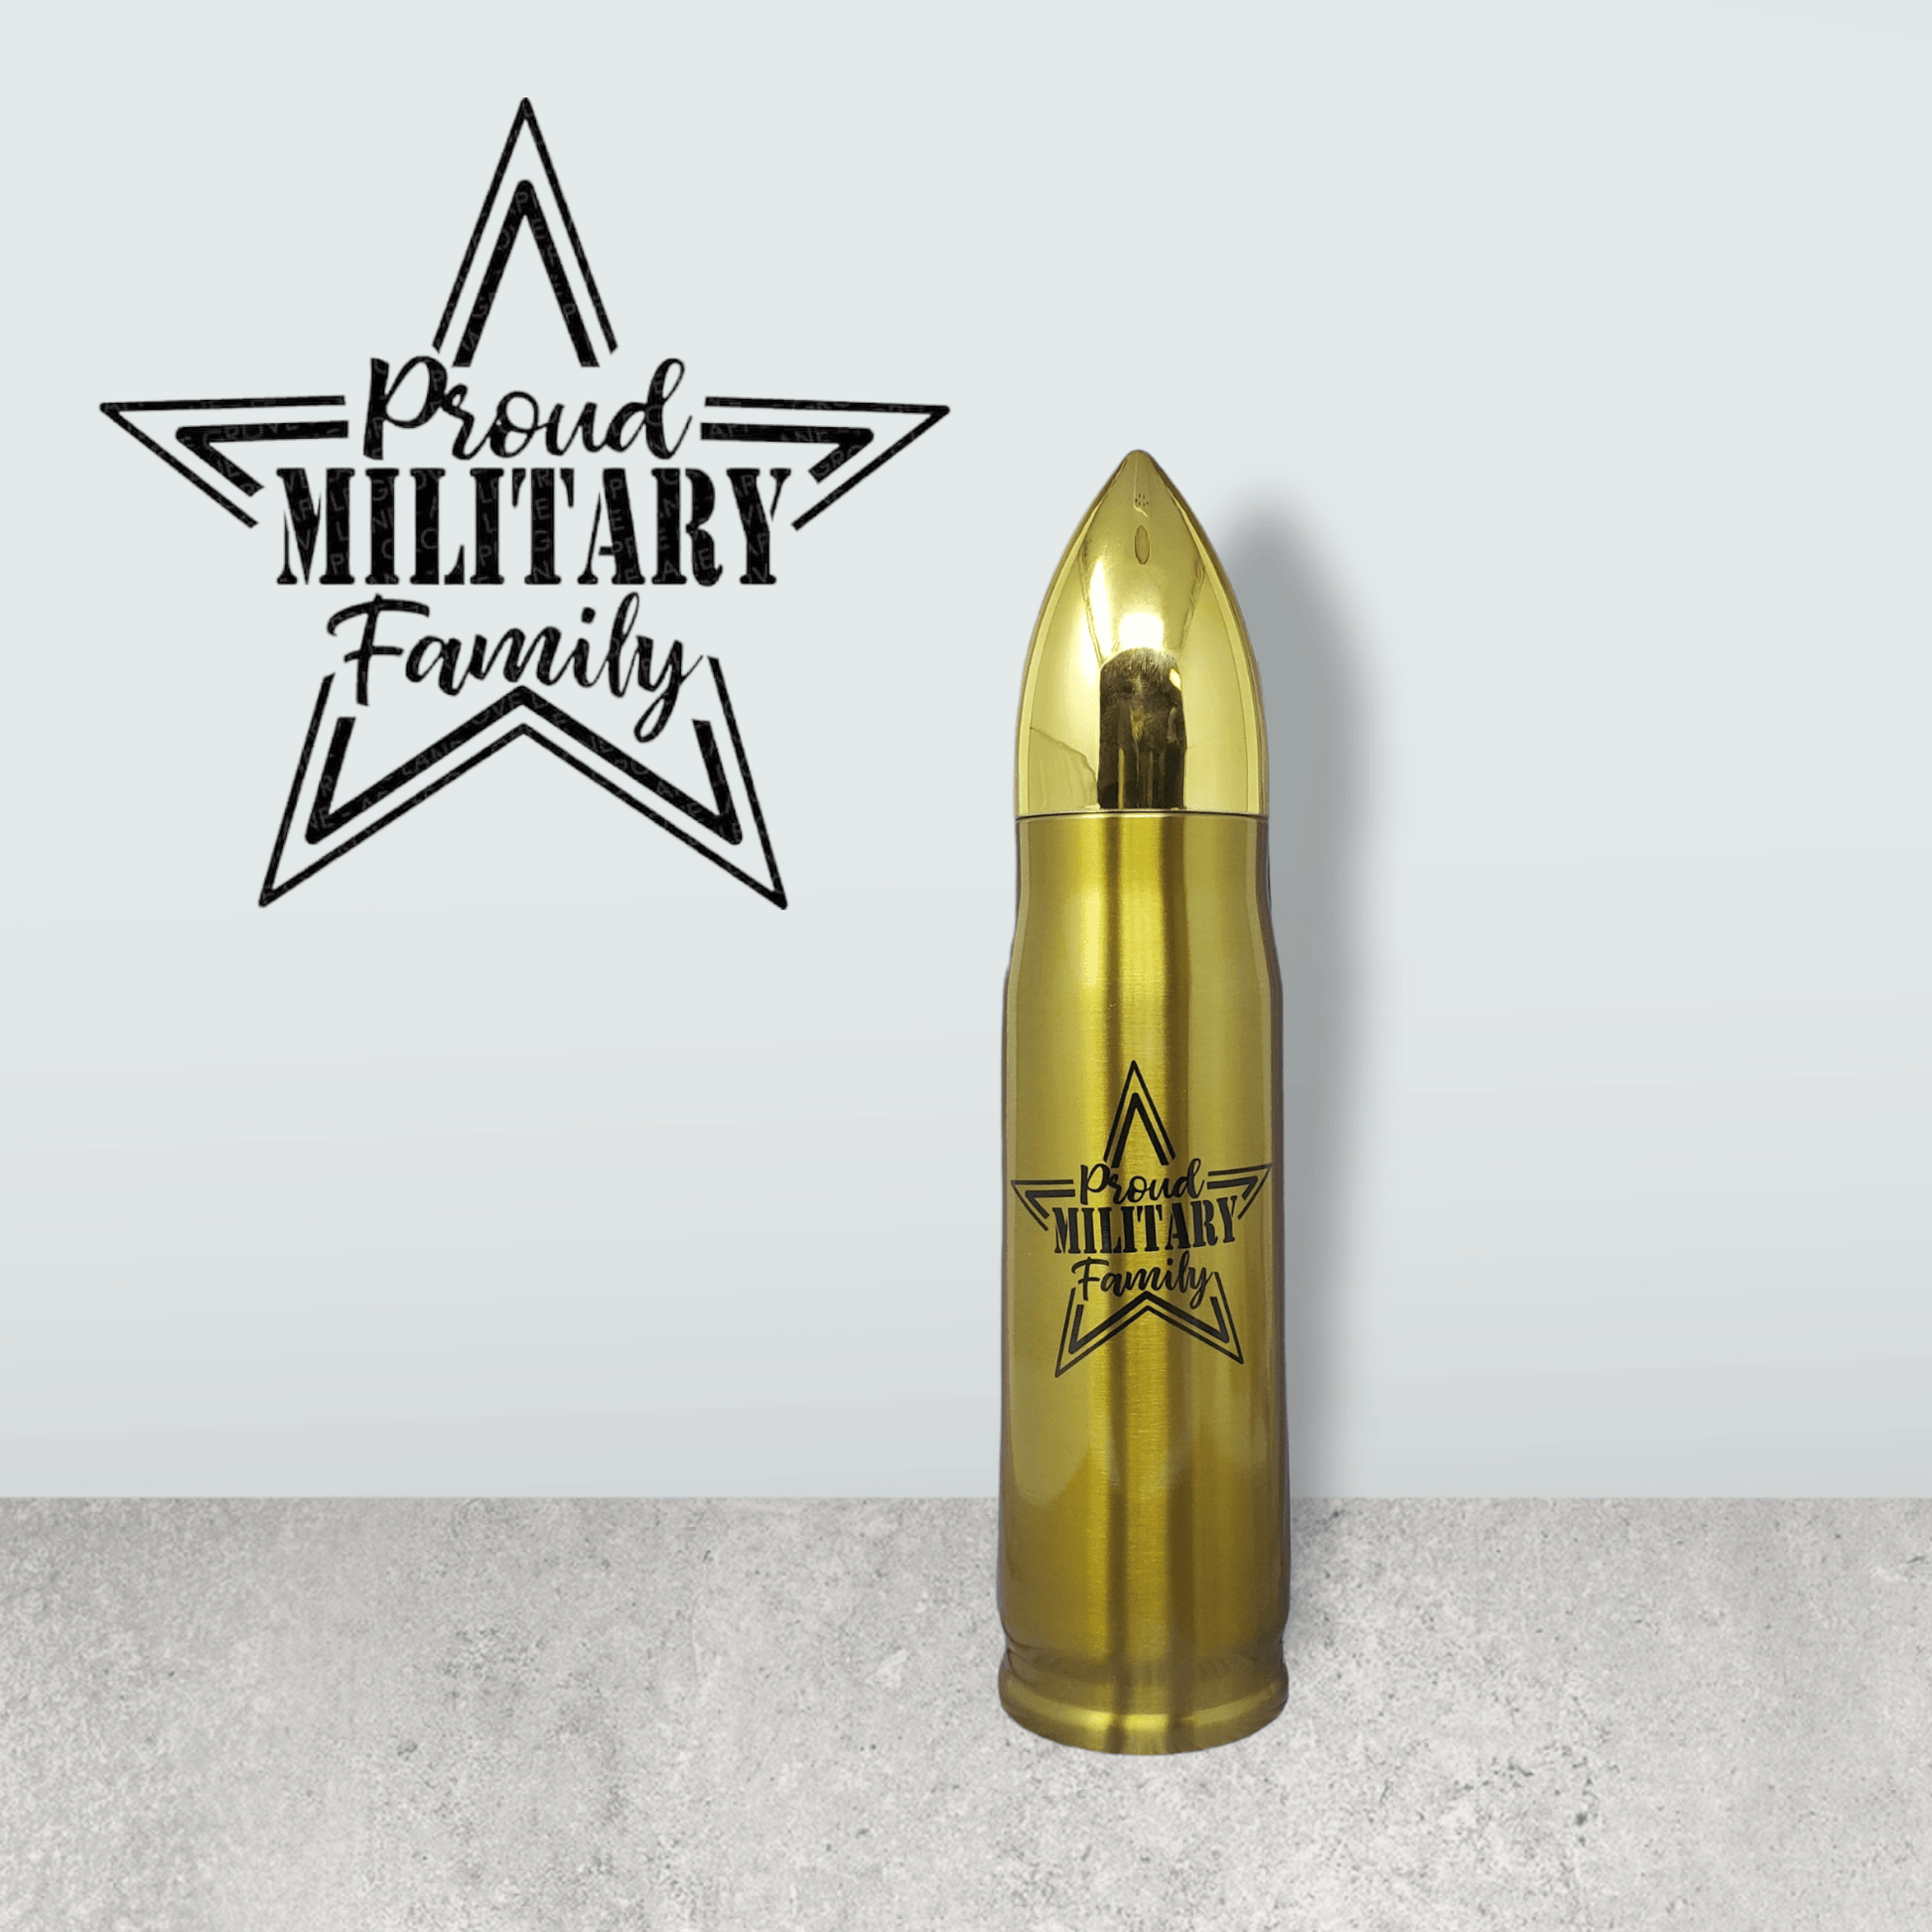 Proud Military Family Bullet Thermos - Erikas Crafts